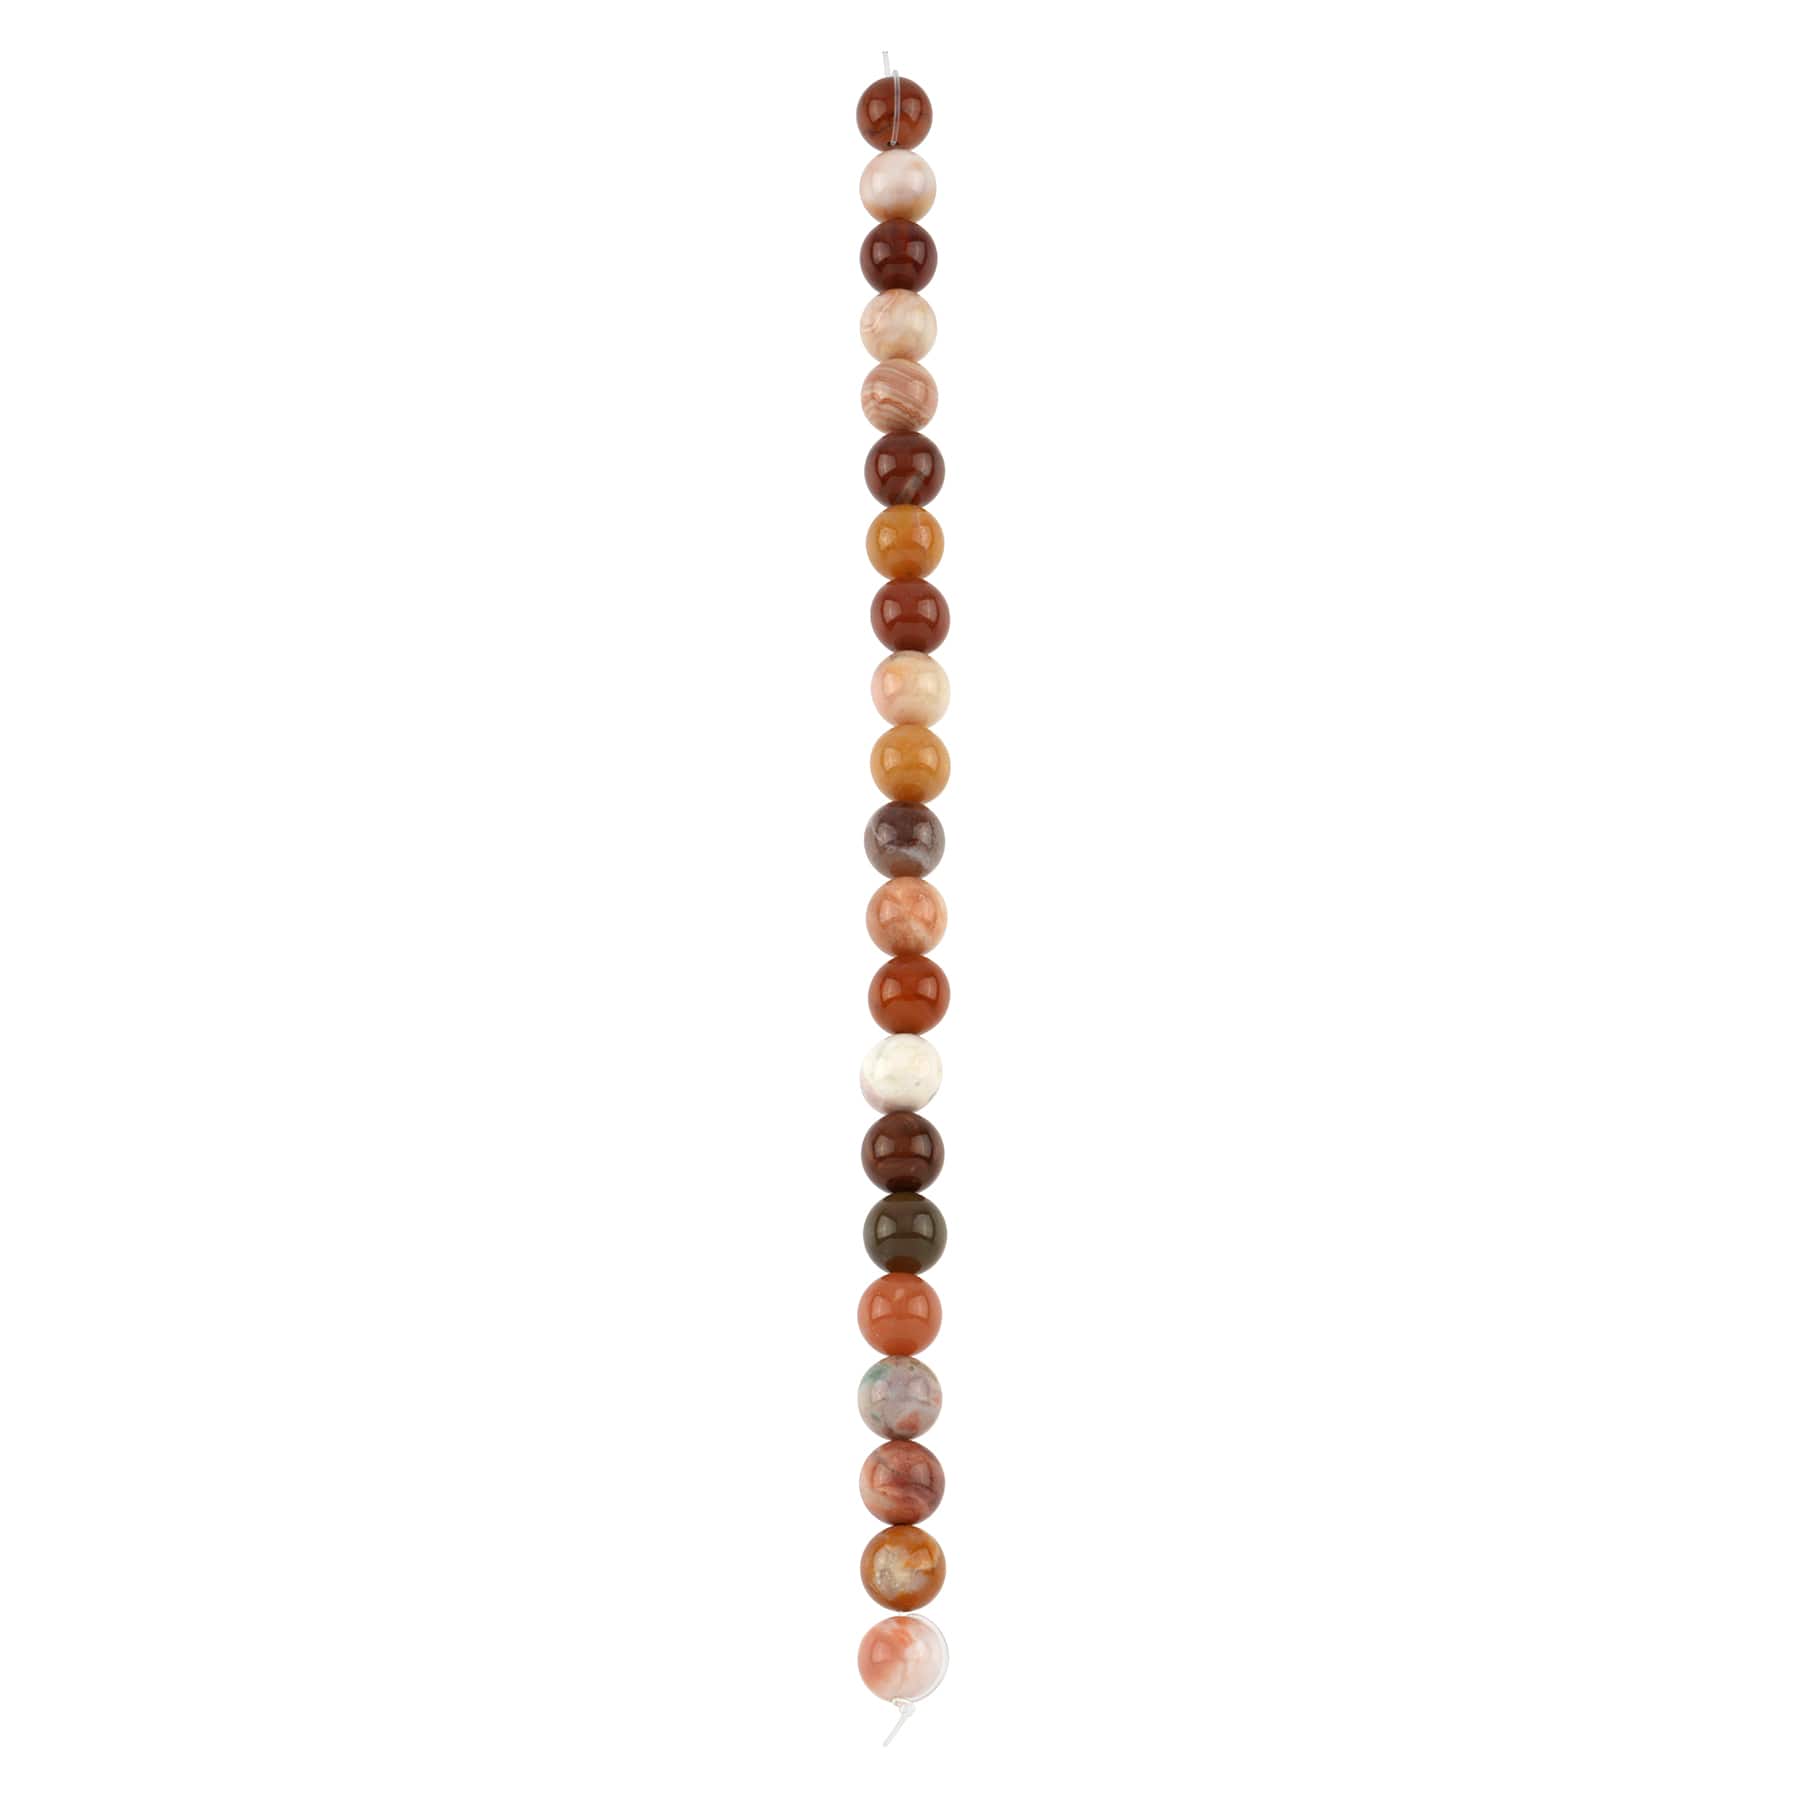 12 Packs: 21 ct. (252 total) Multicolor Wood Round Beads, 8mm by Bead Landing&#x2122;